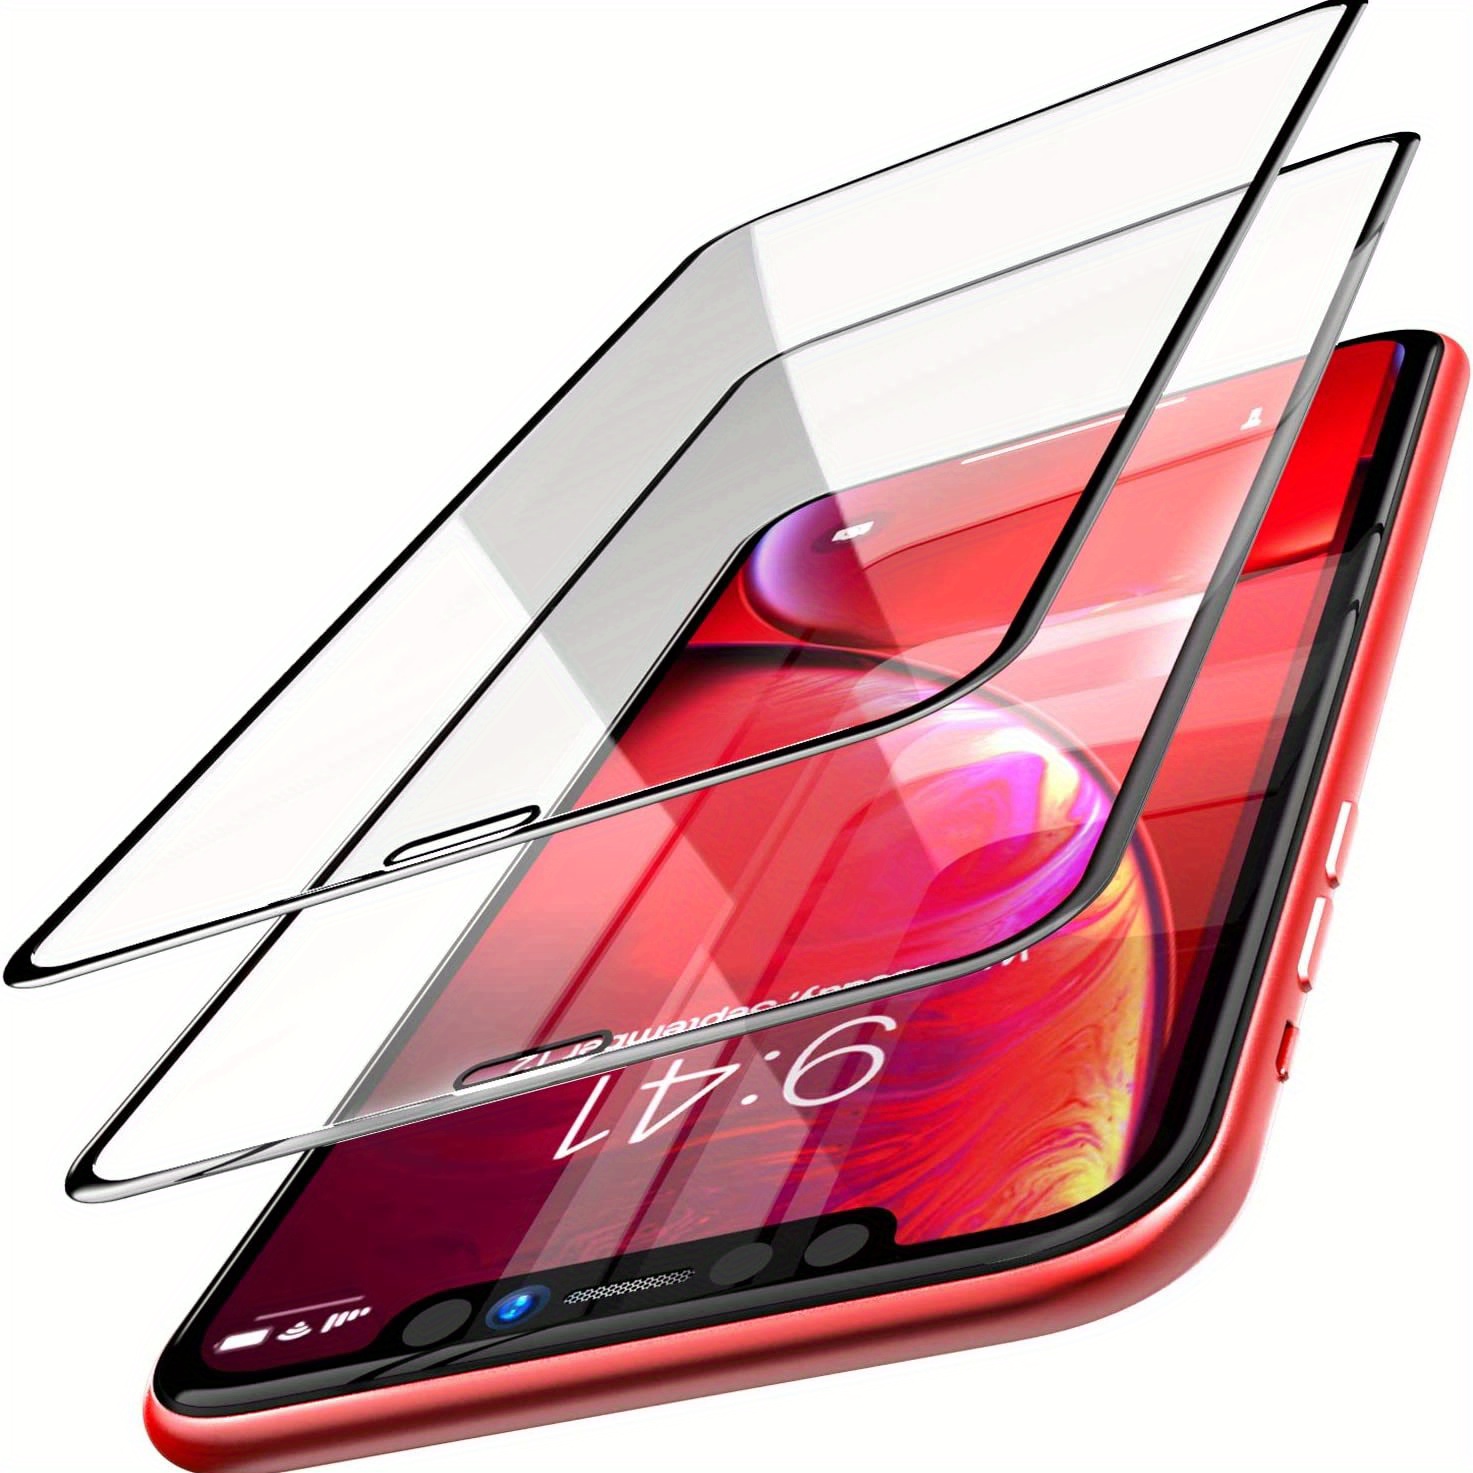 5D Tempered Glass Screen Protector Full Cover Compatible With iPhone XS Max  